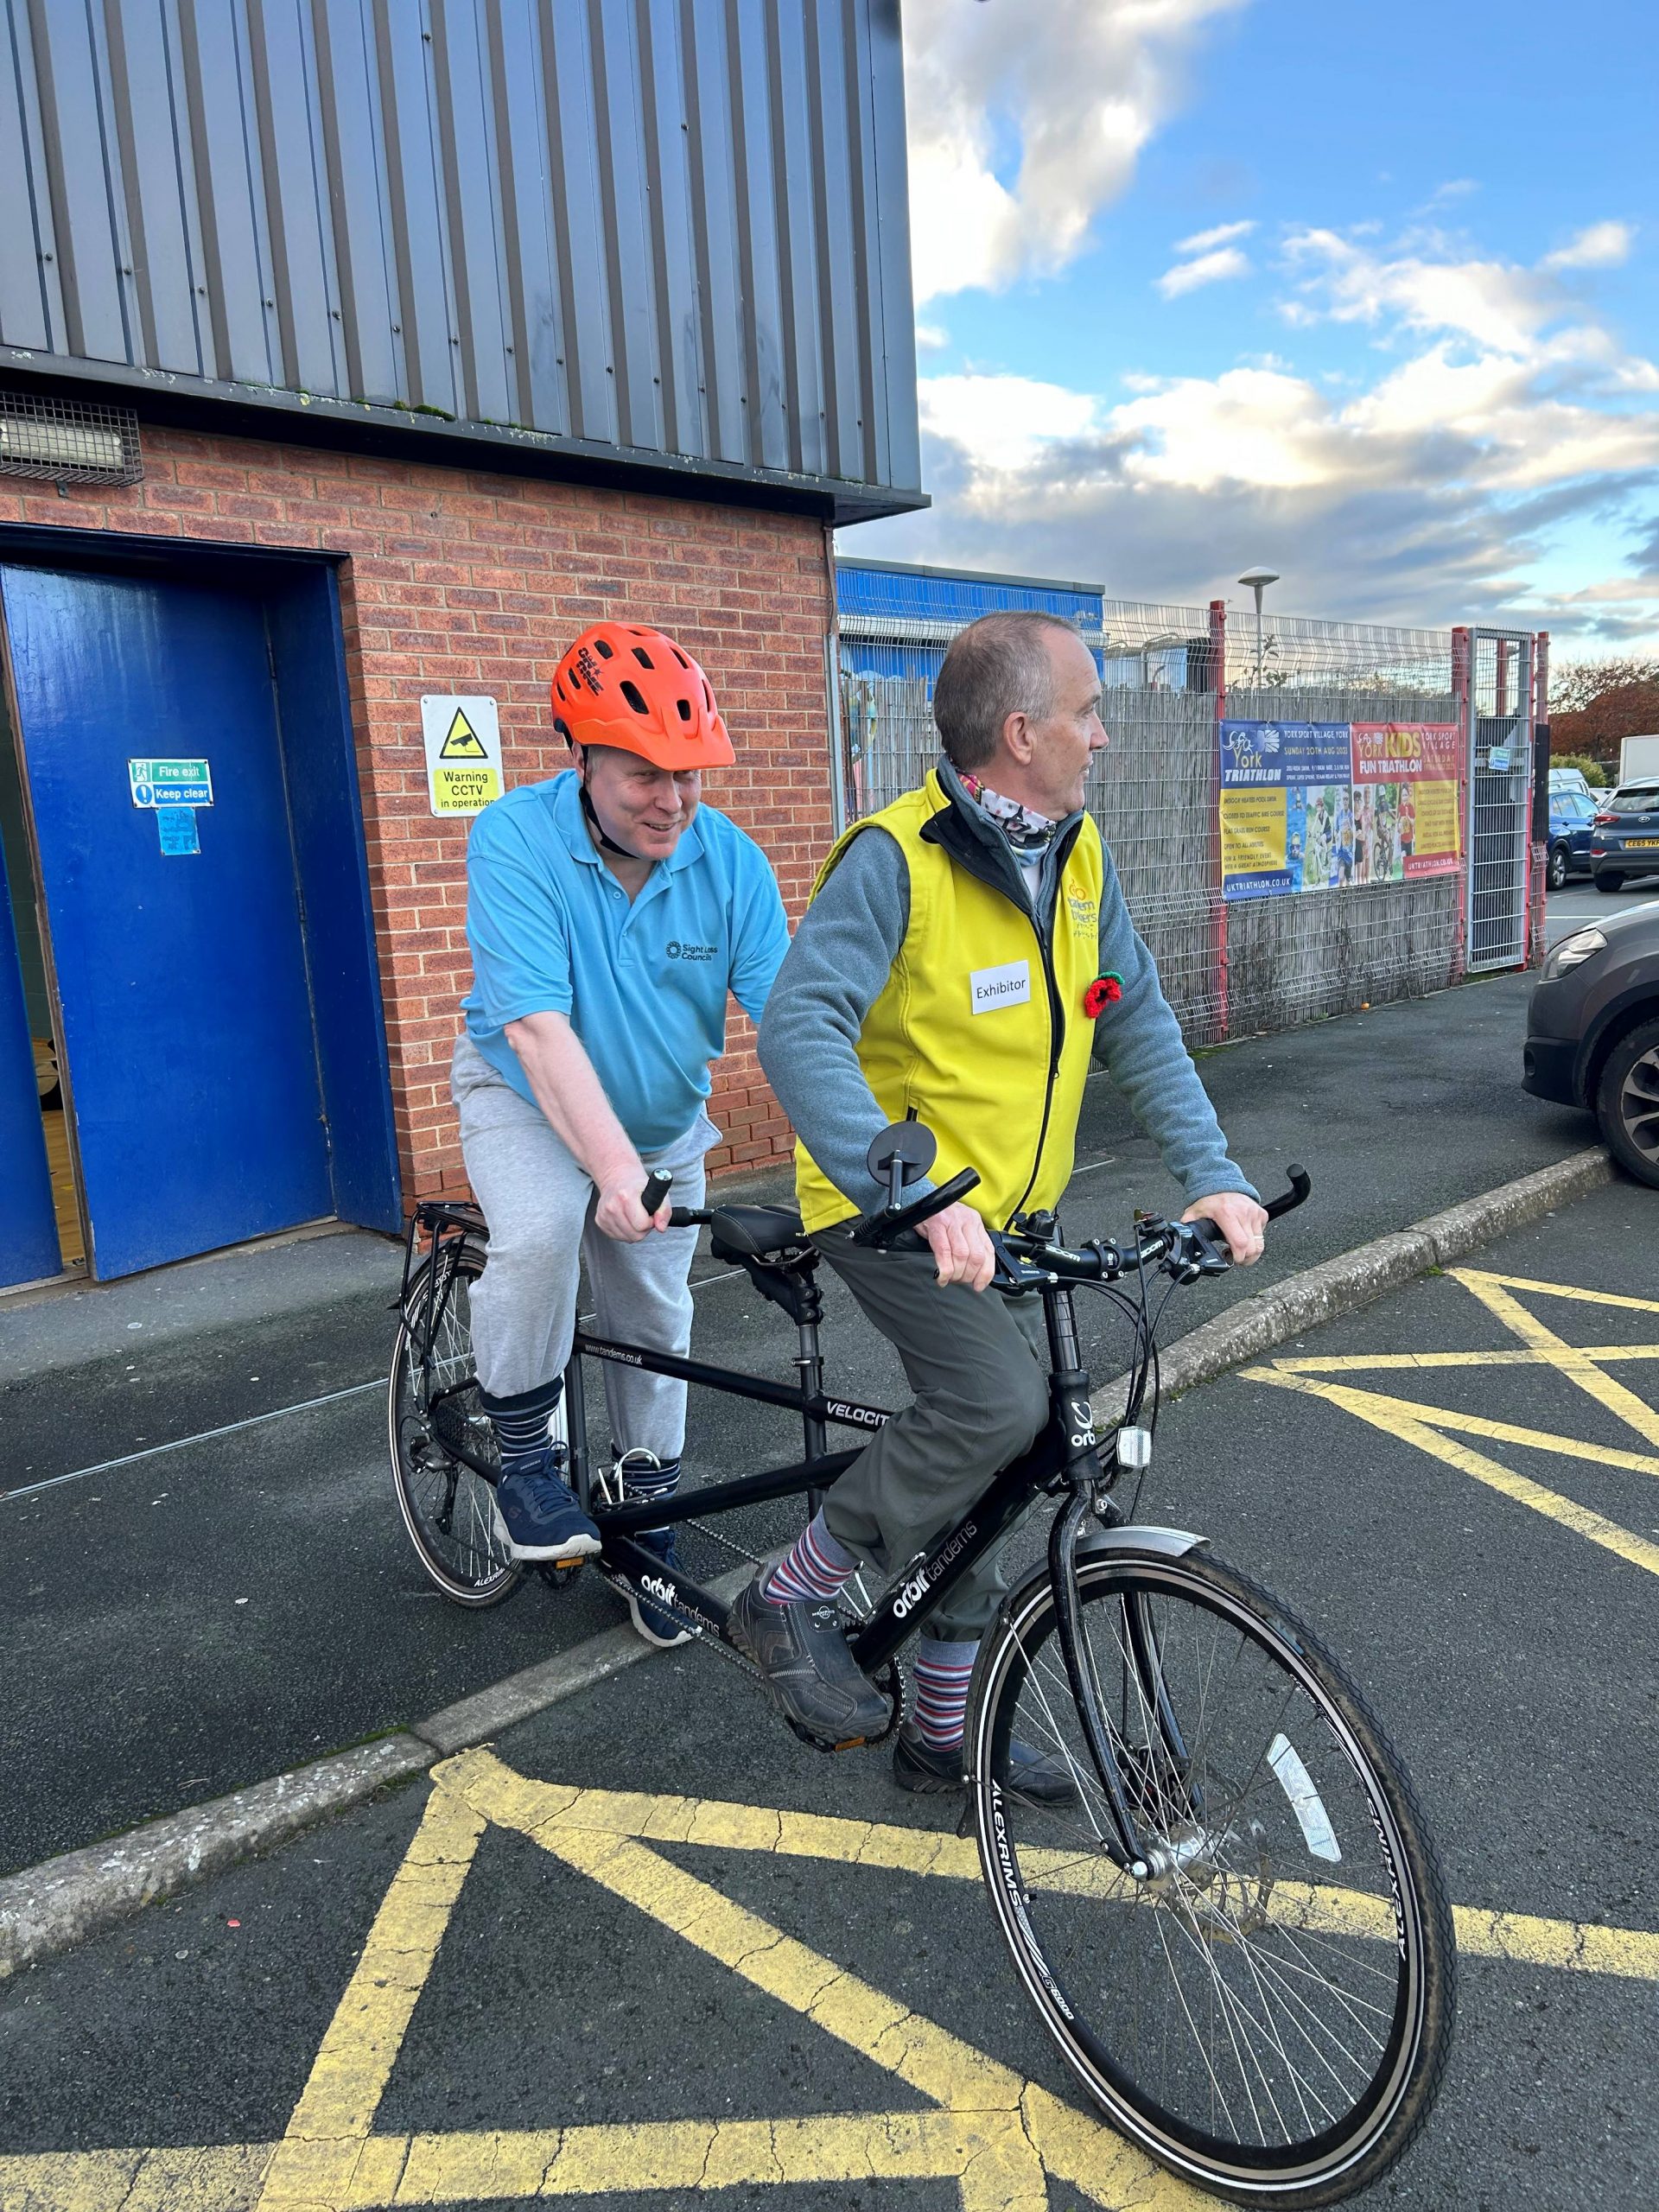 Senior Engagement Manager, Iain Mitchell, riding the tandem bike with Tandem Trekkers.